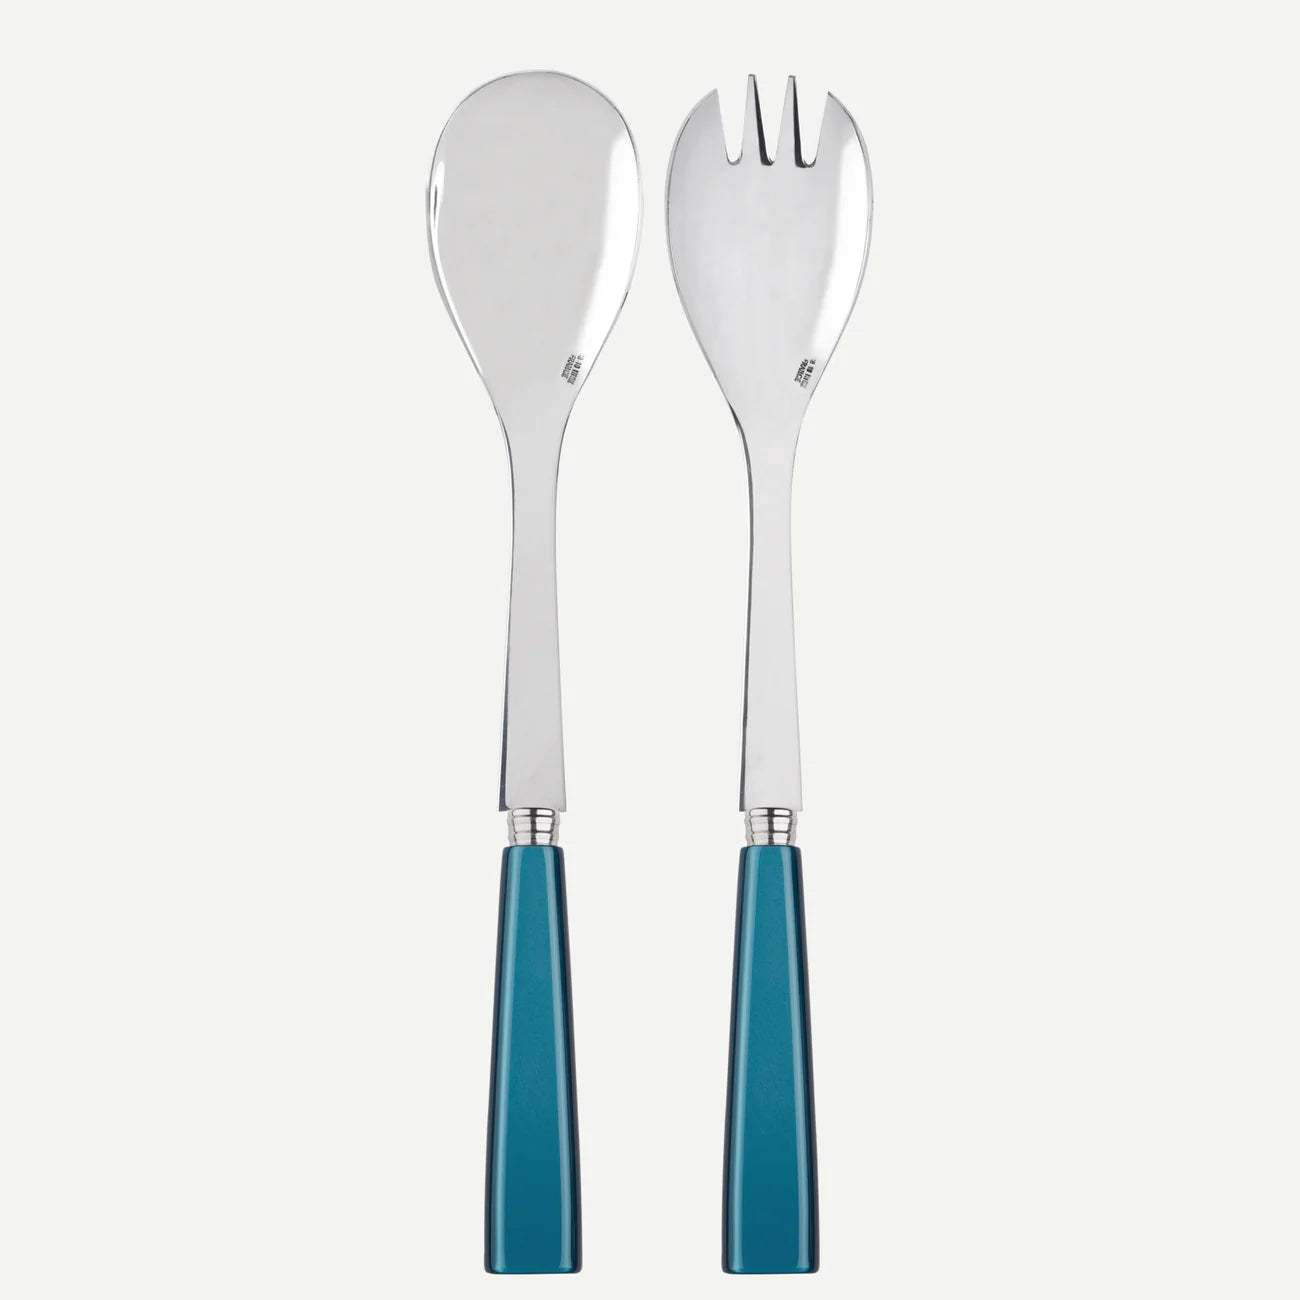 A sabre paris salad serving set comprising of a large fork and a large spoon with bright turquoise handles.